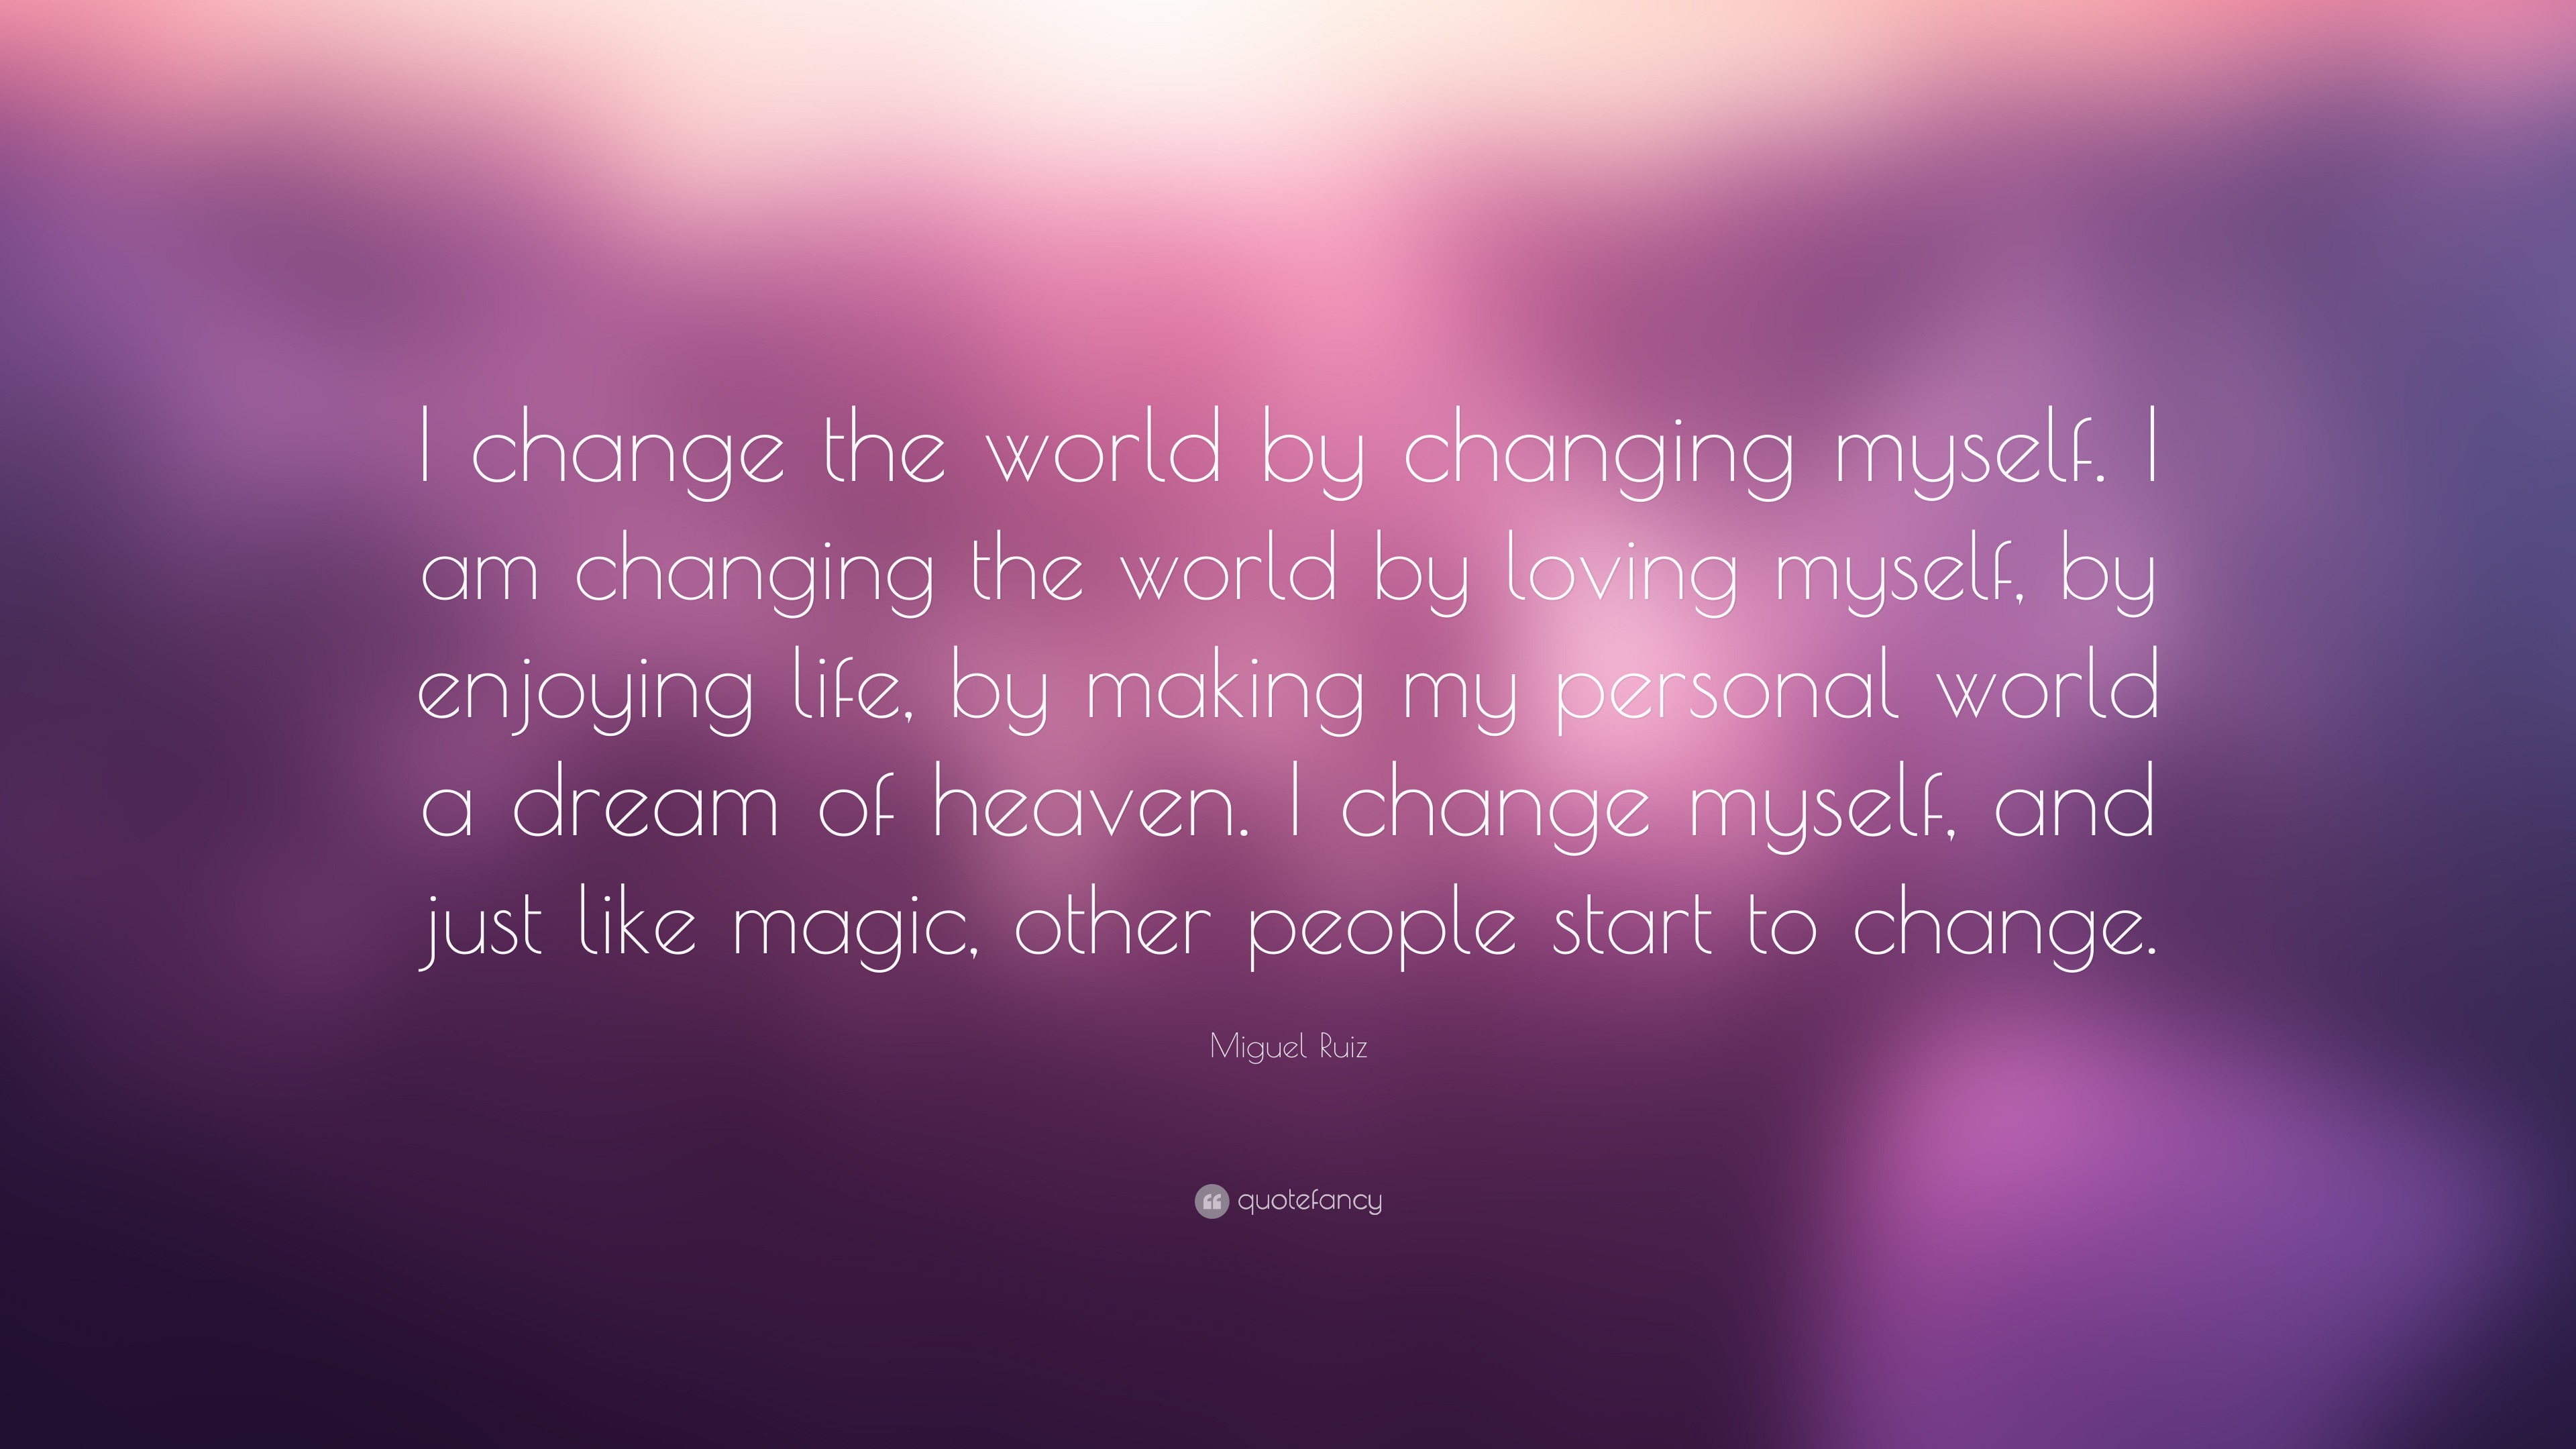 Miguel Ruiz Quote “I change the world by changing myself I am changing